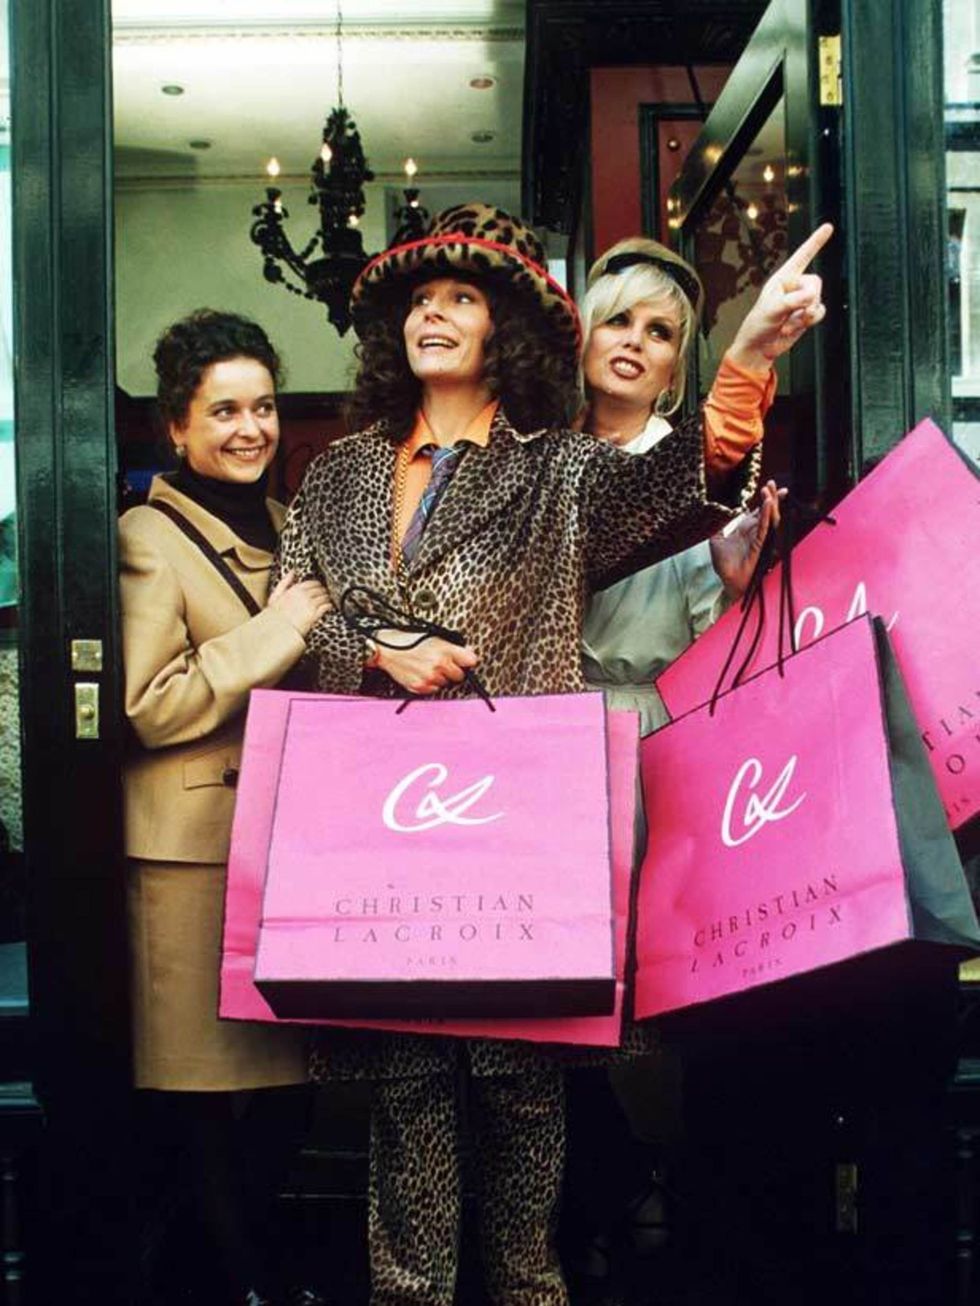 <p>Eddy, Patsy and Saf make a trip to the <a href="http://www.elleuk.com/content/search?SearchText=christian+lacroix&amp;SearchButton=Search">Christian Lacroix</a> store.</p>